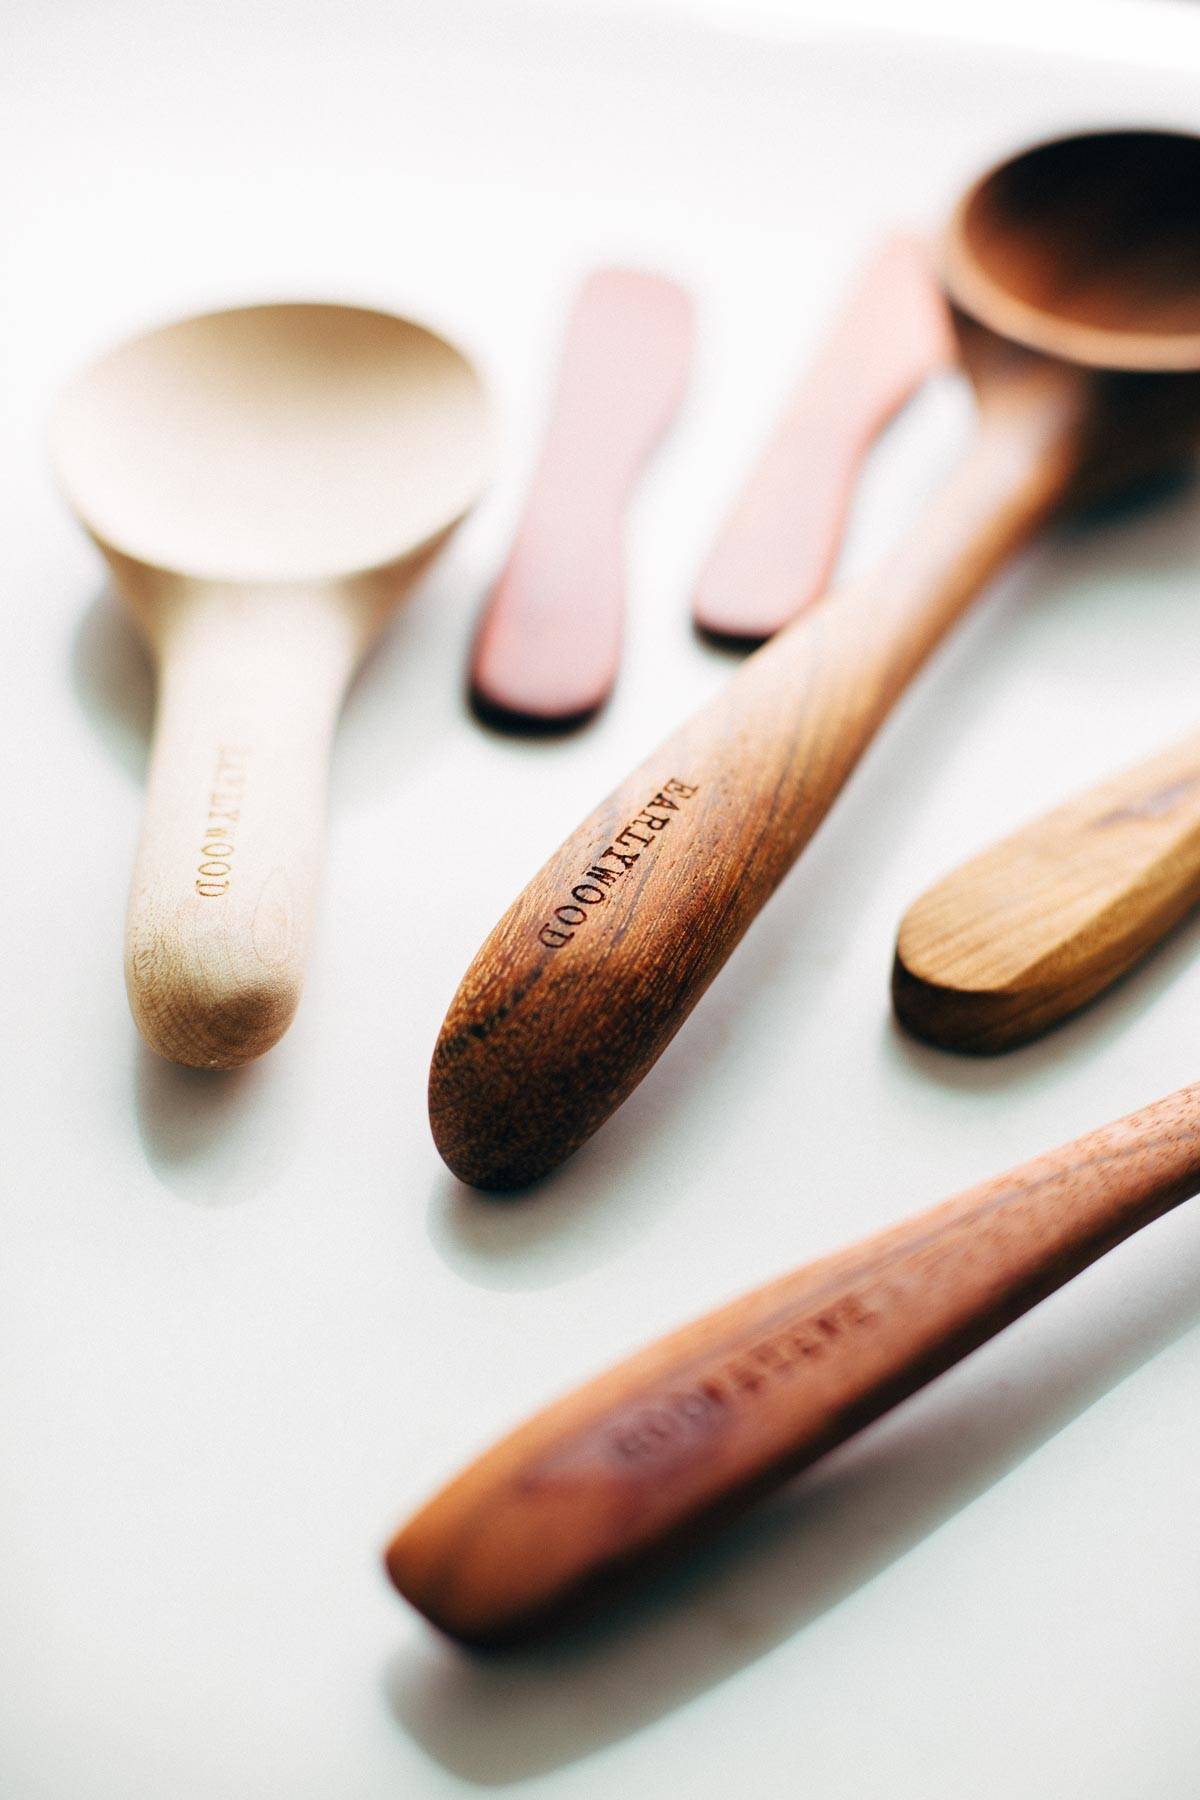 Earlywood Handcrafted Wooden Utensils Giveaway | pinchofyum.com